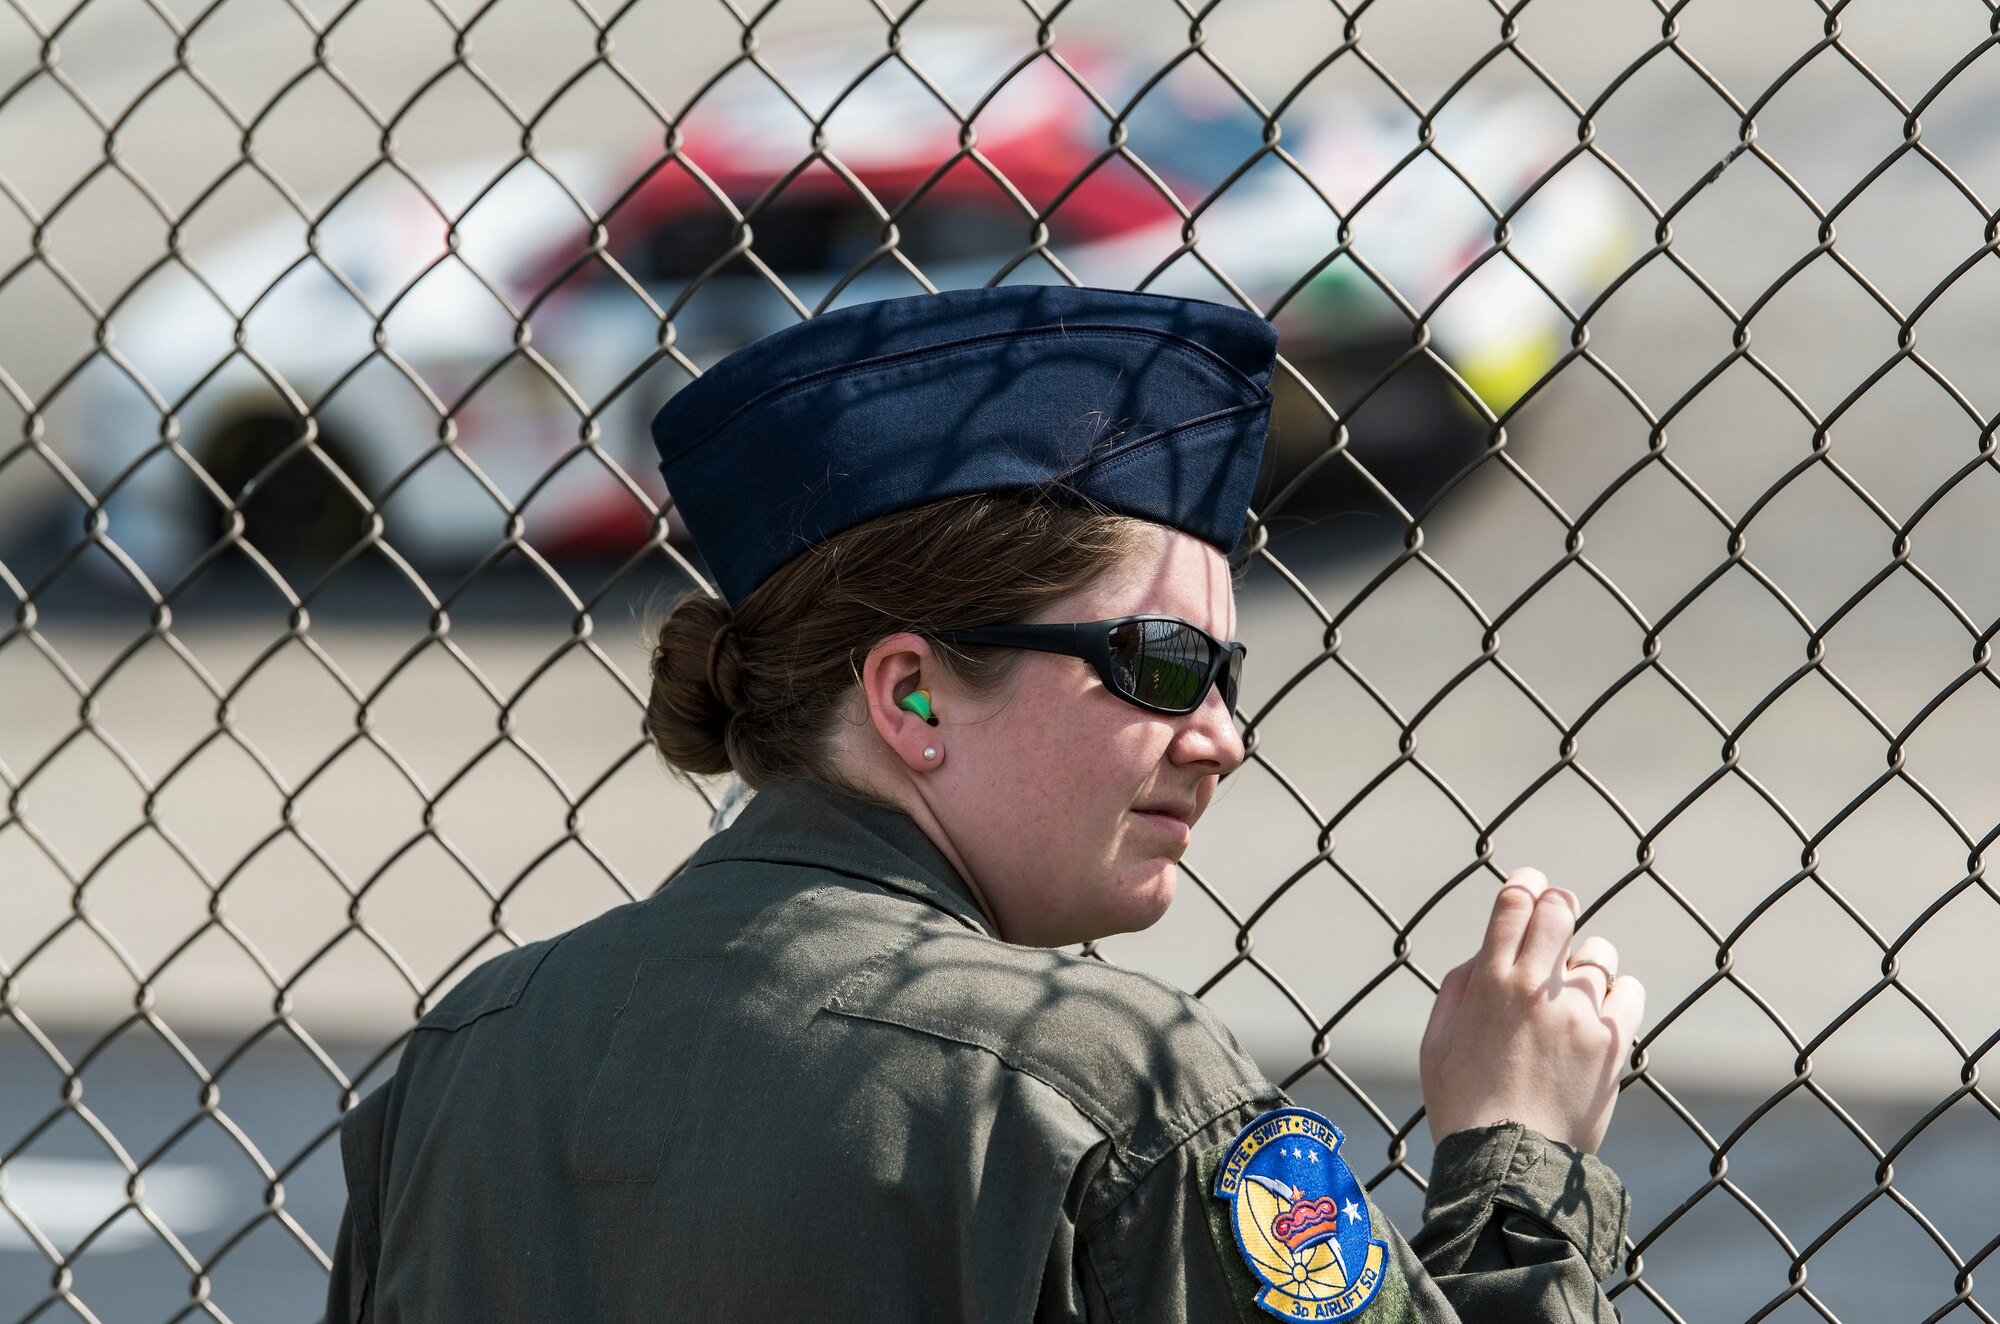 Senior Airman Ashley Jones, 3rd Airlift Squadron loadmaster, watches NASCAR XFINITY Series race cars take practice laps May 4, 2018, at Dover International Speedway, Dover, Del. Jones and other honorary pit crew members watched race cars practice for the 37th Annual “OneMain Financial 200” race scheduled for May 5. (U.S. Air Force photo by Roland Balik)